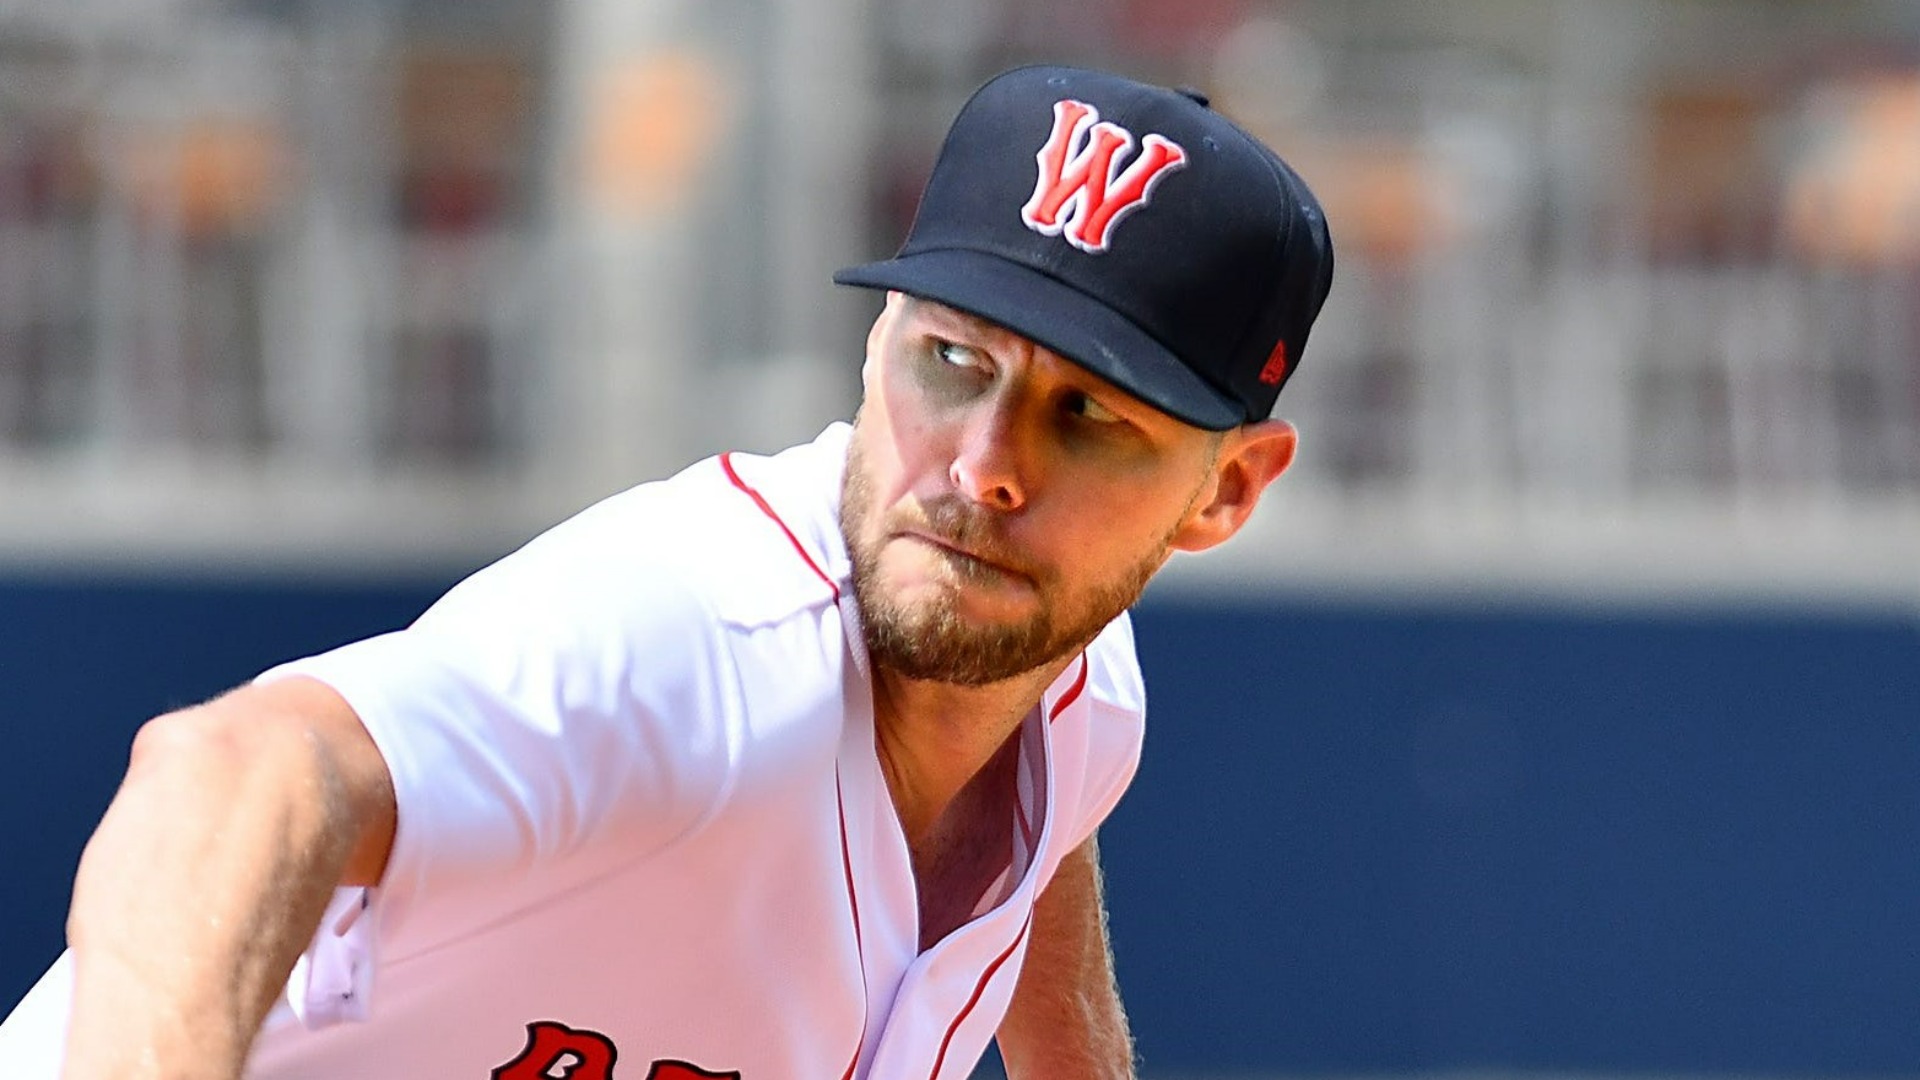 Chris Sale takes care of business in what could be his final rehab